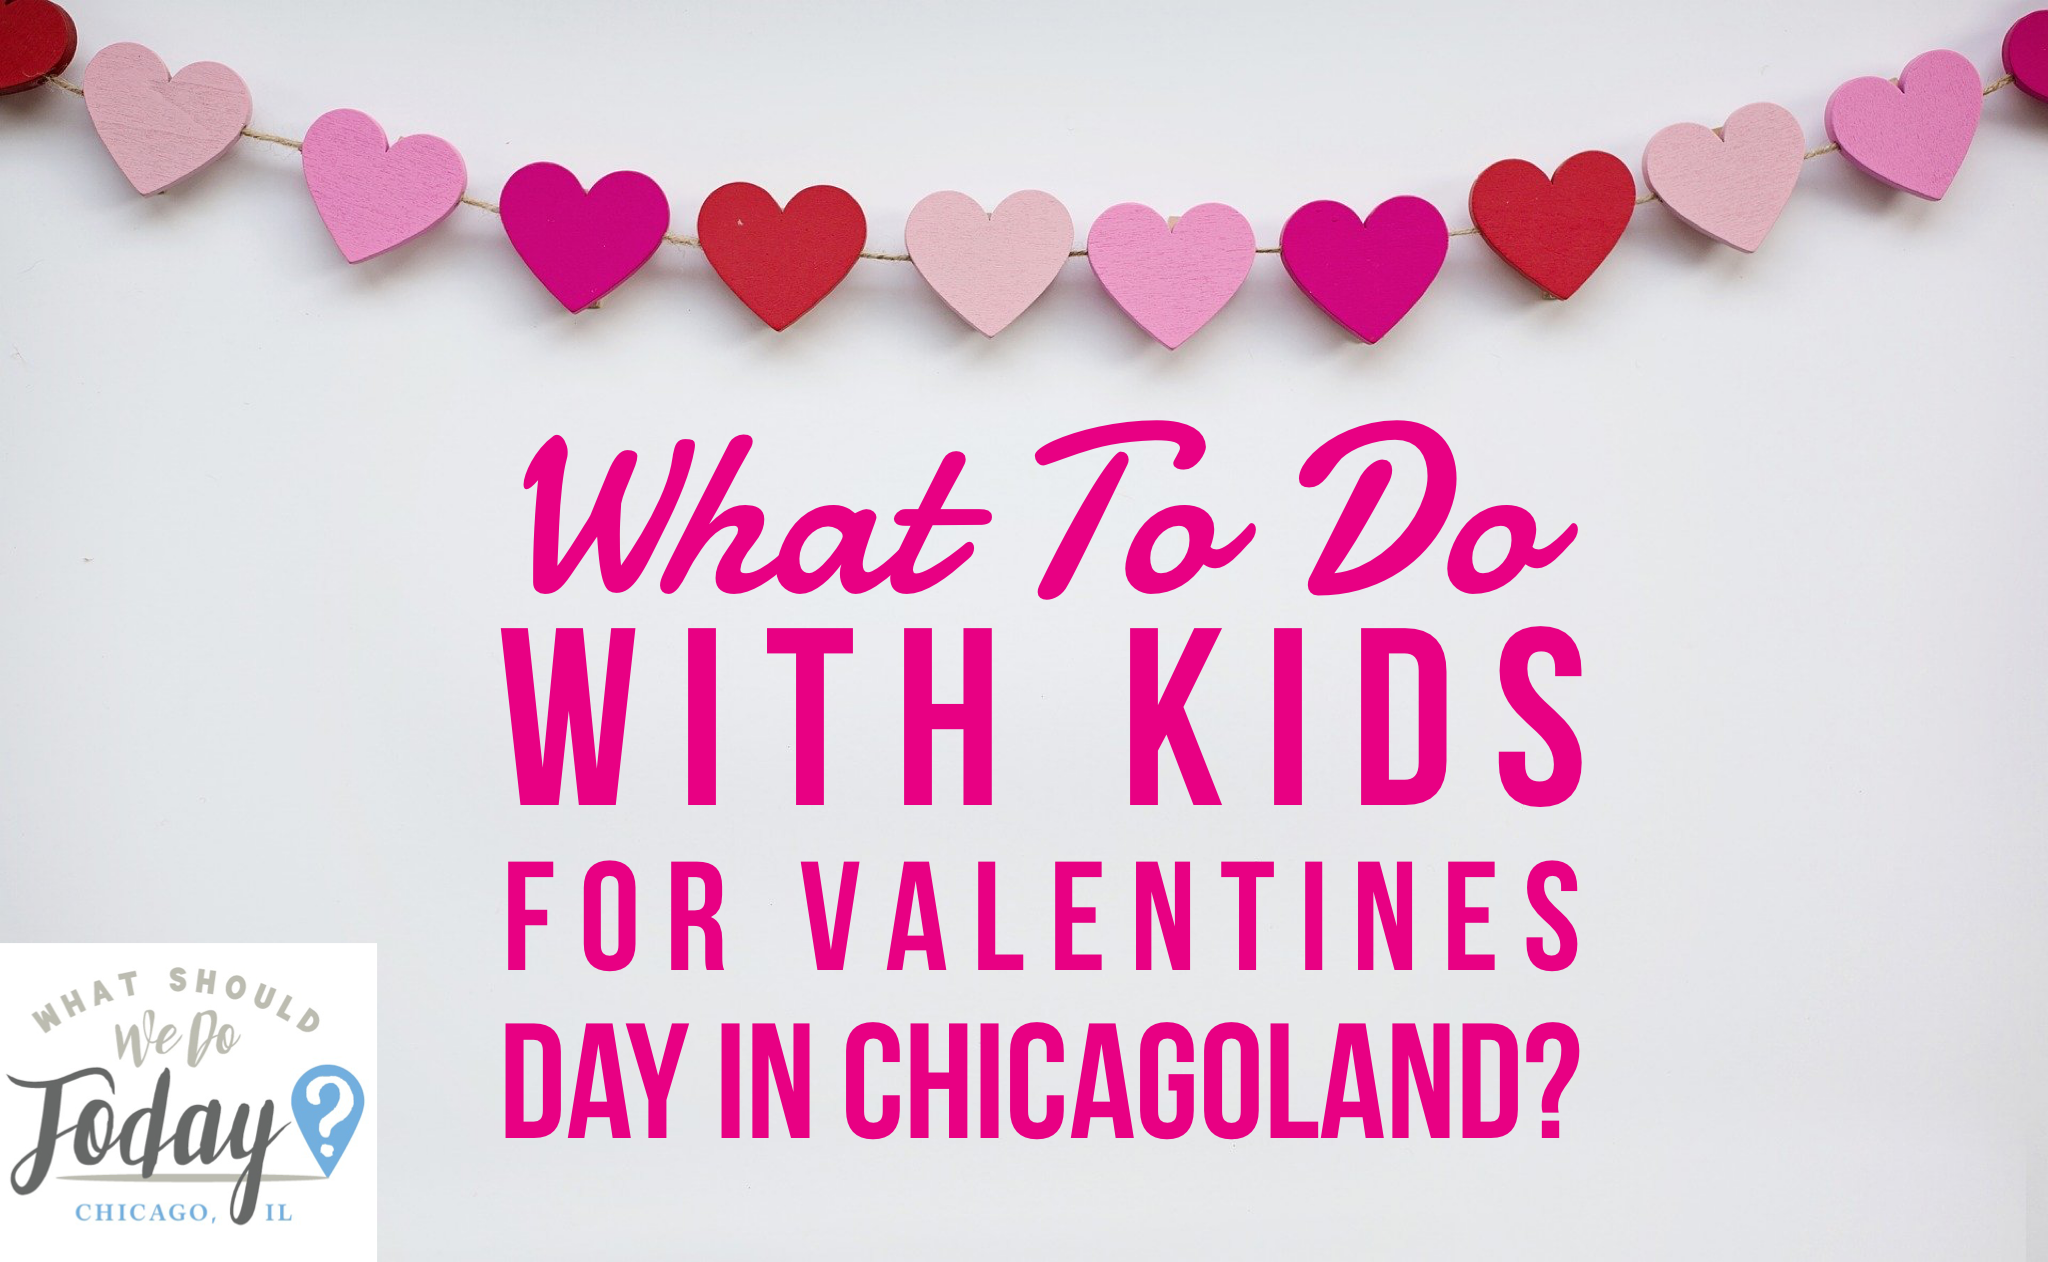 Rainy Day Activities for Chicagoland Kids - Chicago Parent